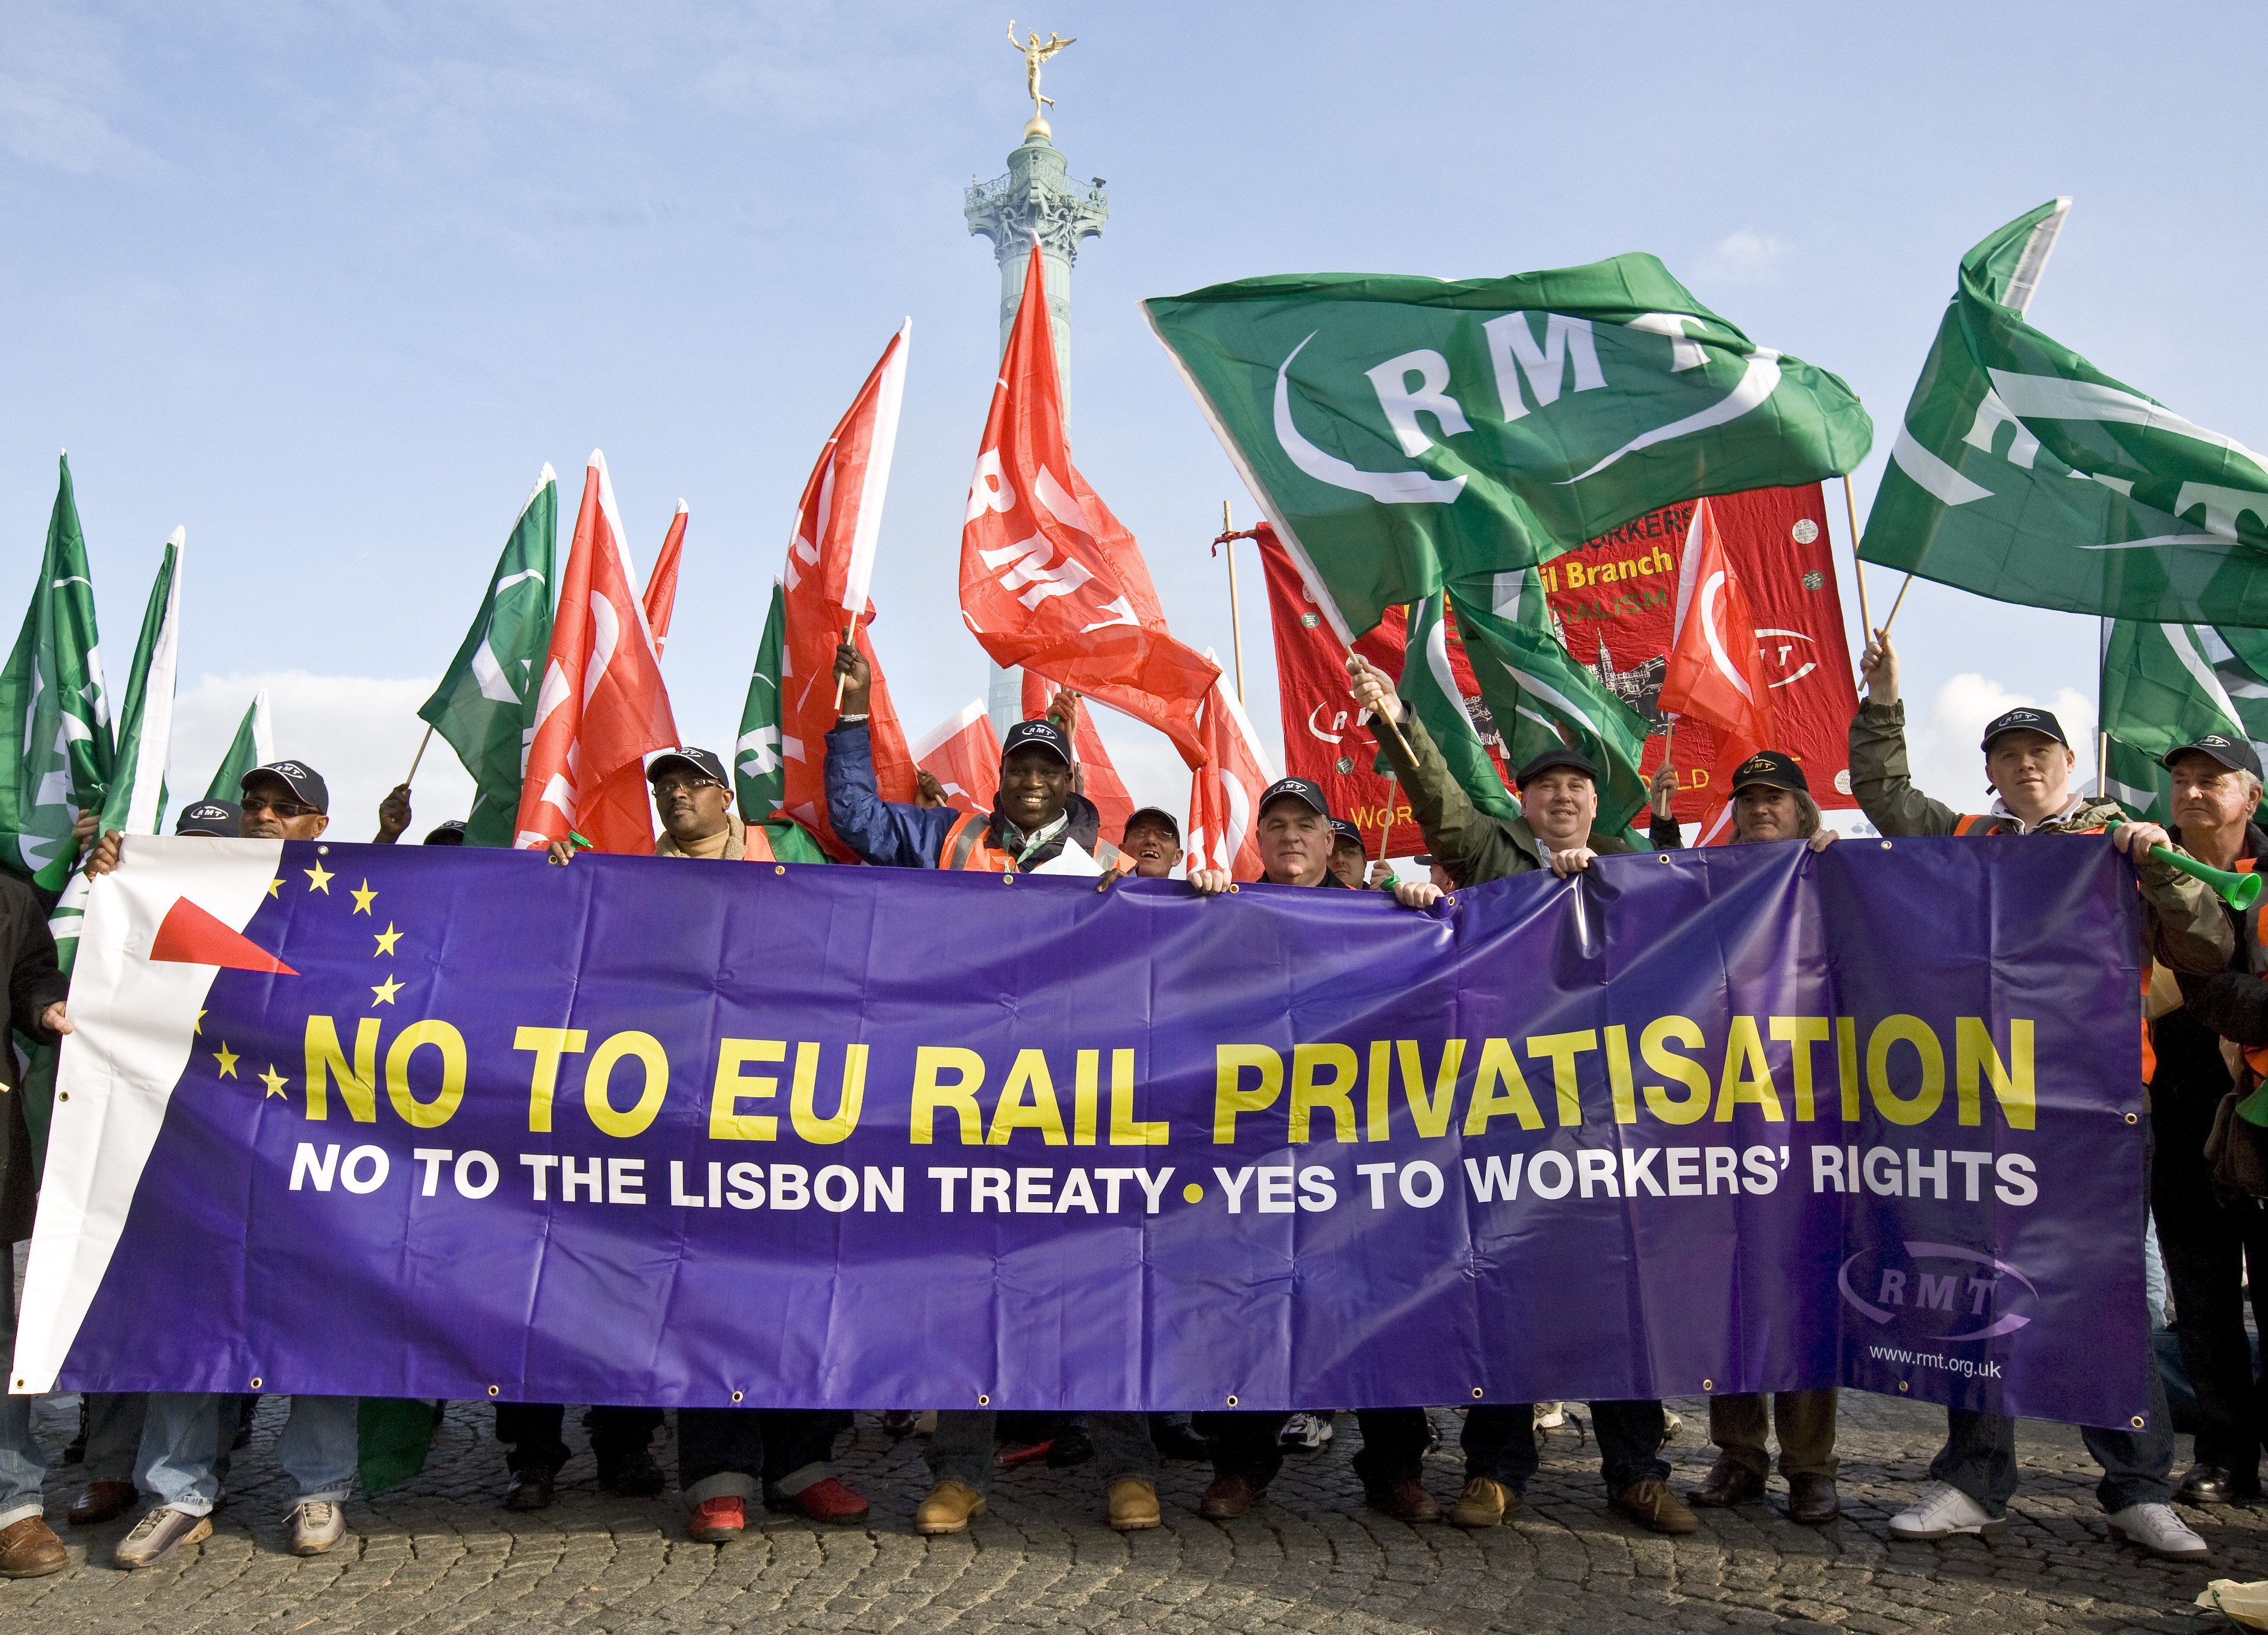 England, UK .13.11. 2008. Paris. RMT ( Rail, Maritime & Transport ) trade union joins CGT & other European rail unions in protest demonstration against EU railways privatisation. © Andrew Wiard - Phone: + 44 (0) 7973-219 201.